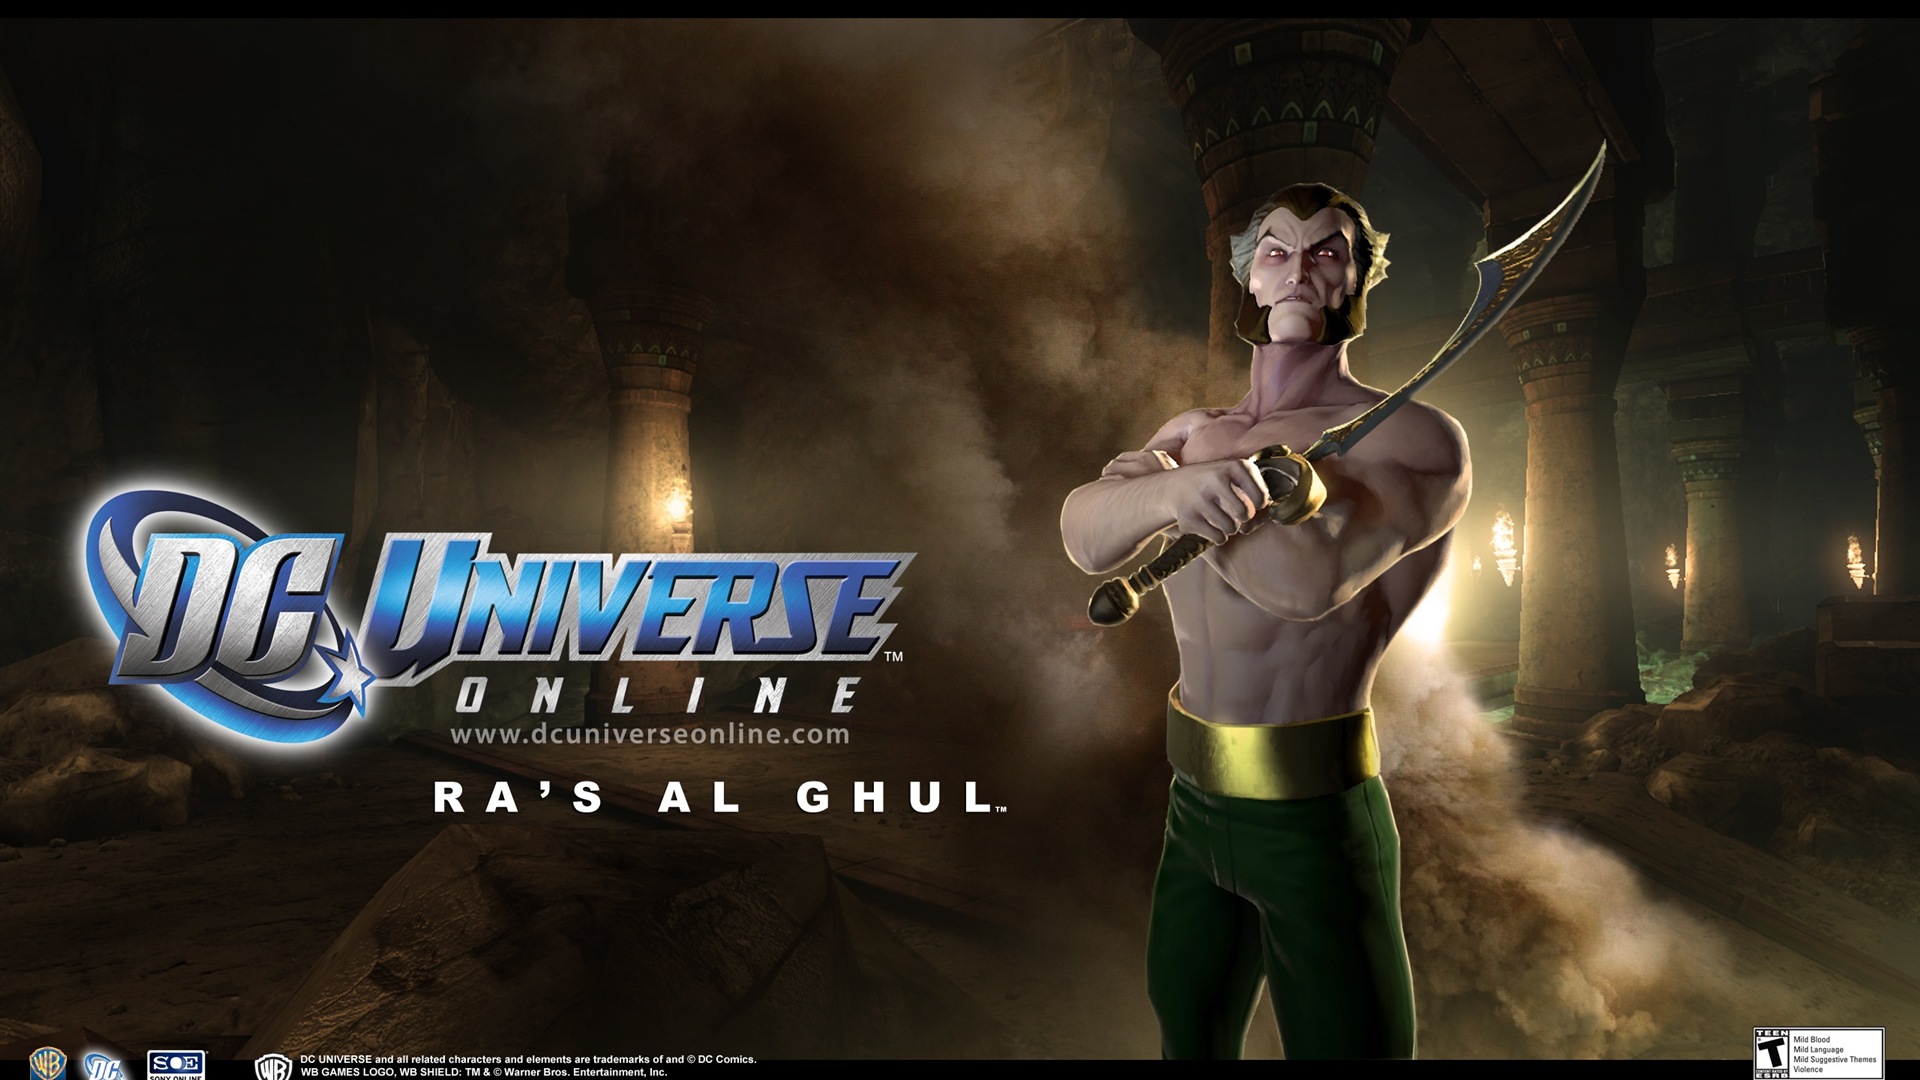 DC Universe Online HD game wallpapers #8 - 1920x1080